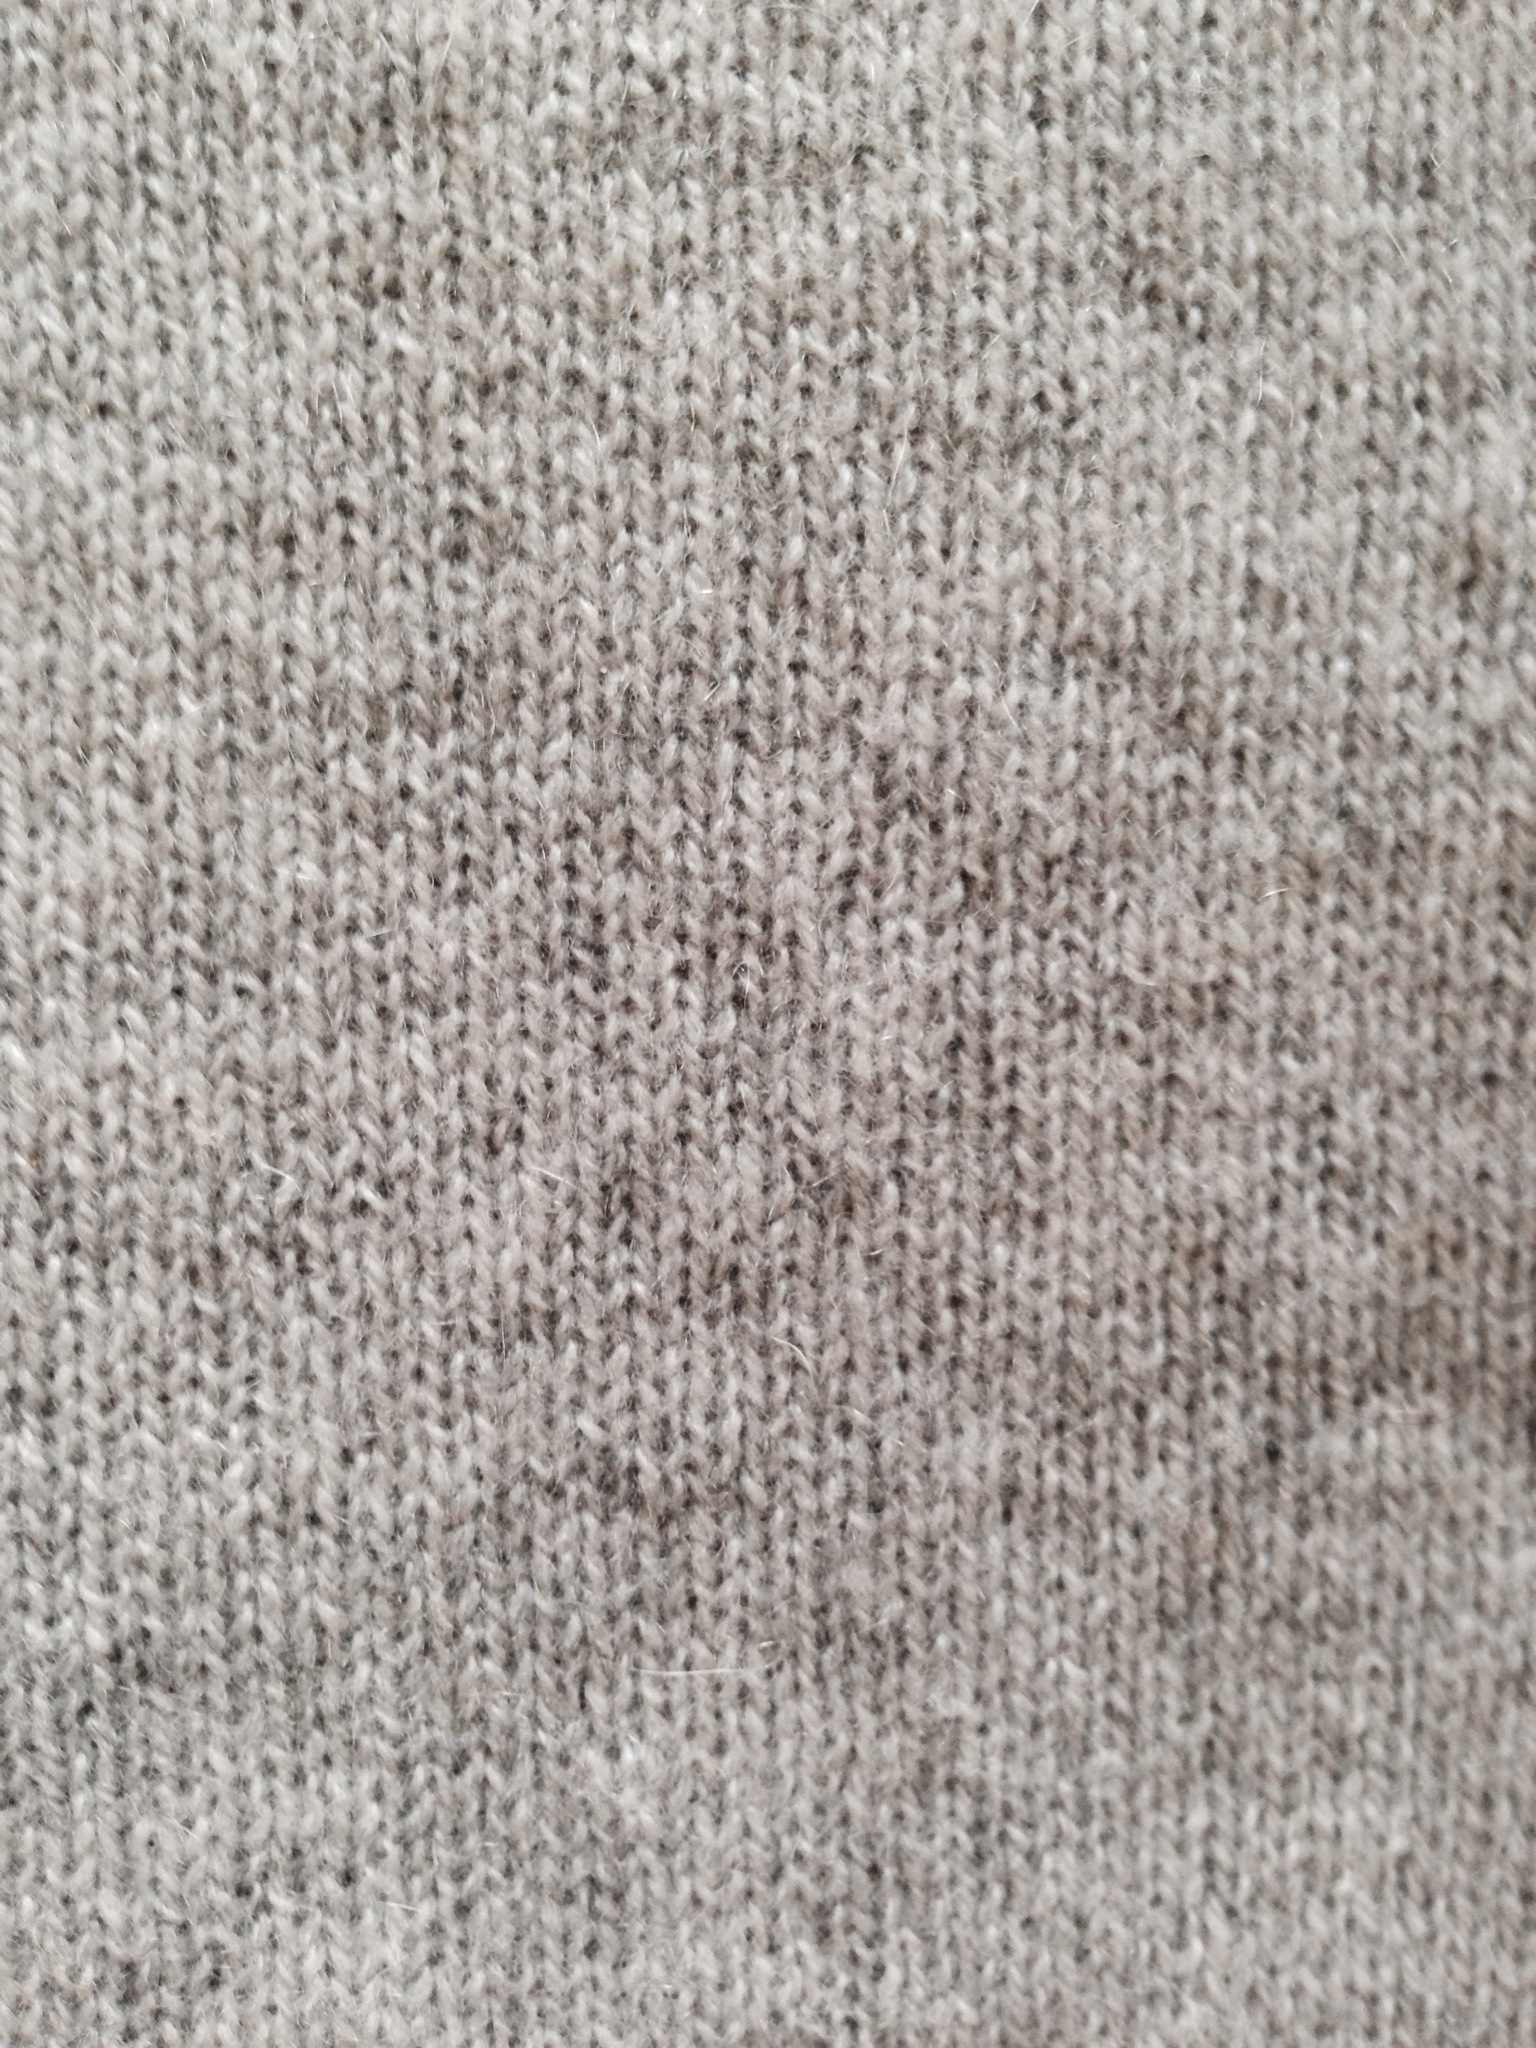 Quick Fix For Pilling Sweaters 